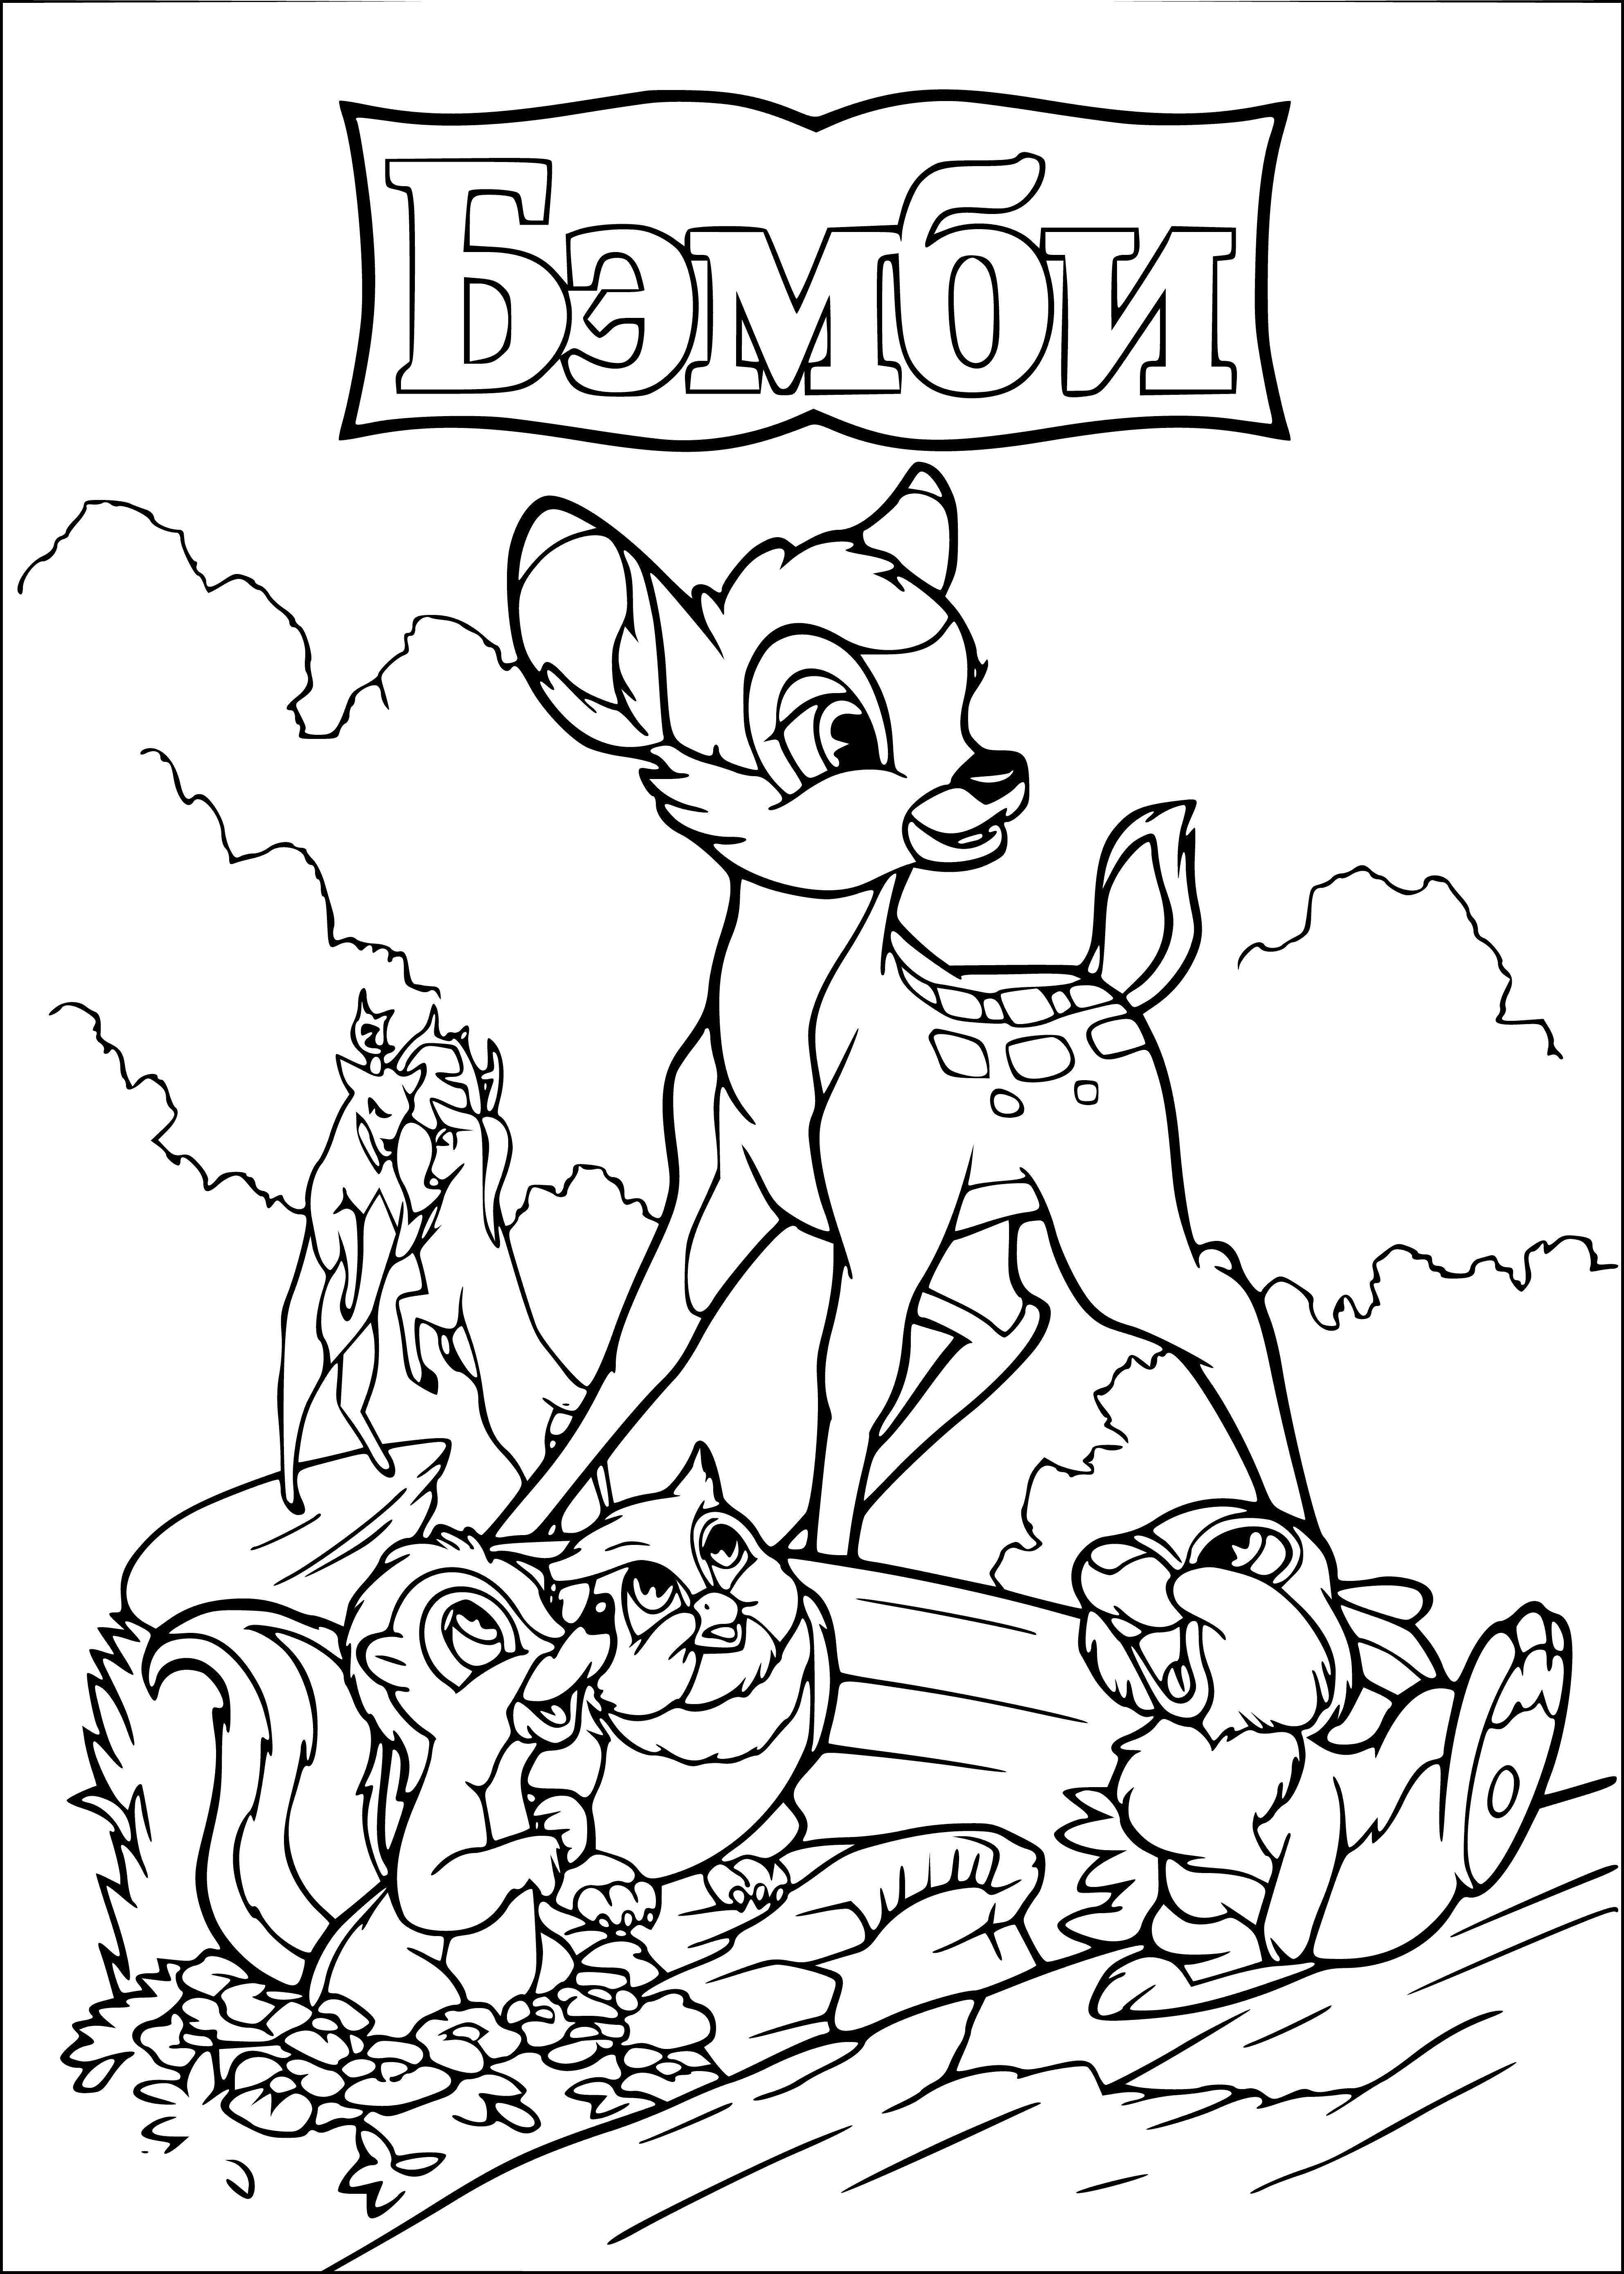 Classic cartoon coloring page